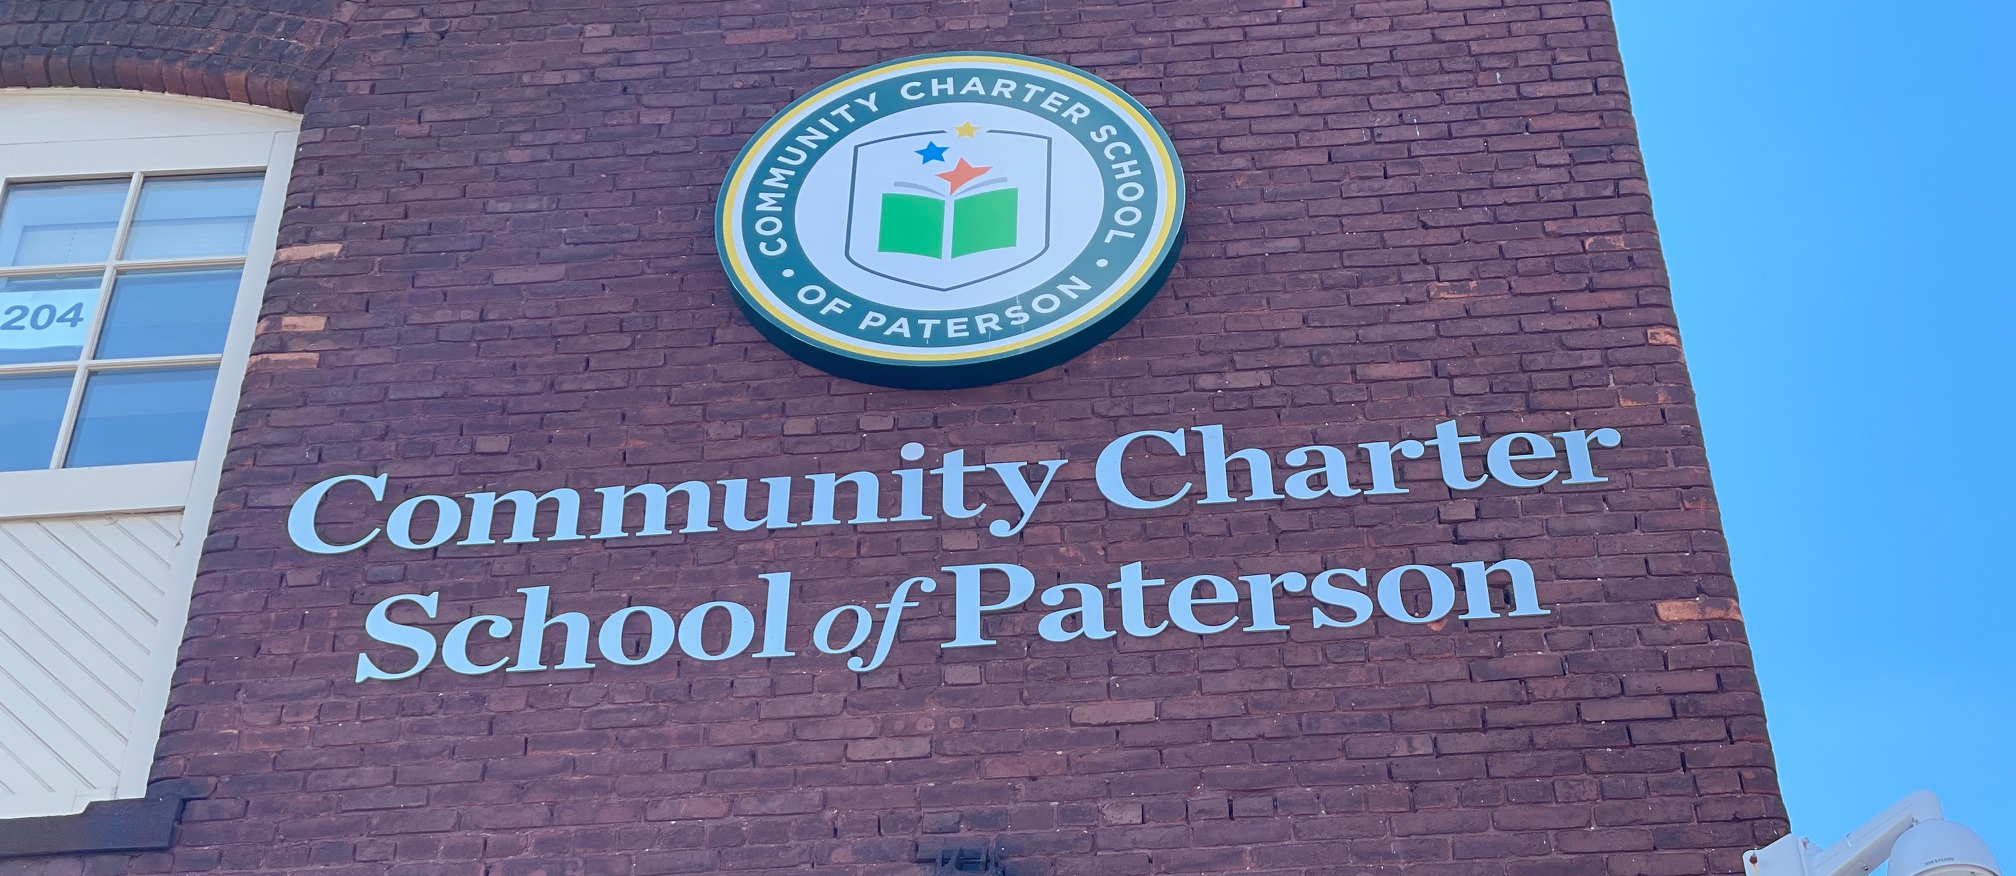 community charter school of paterson